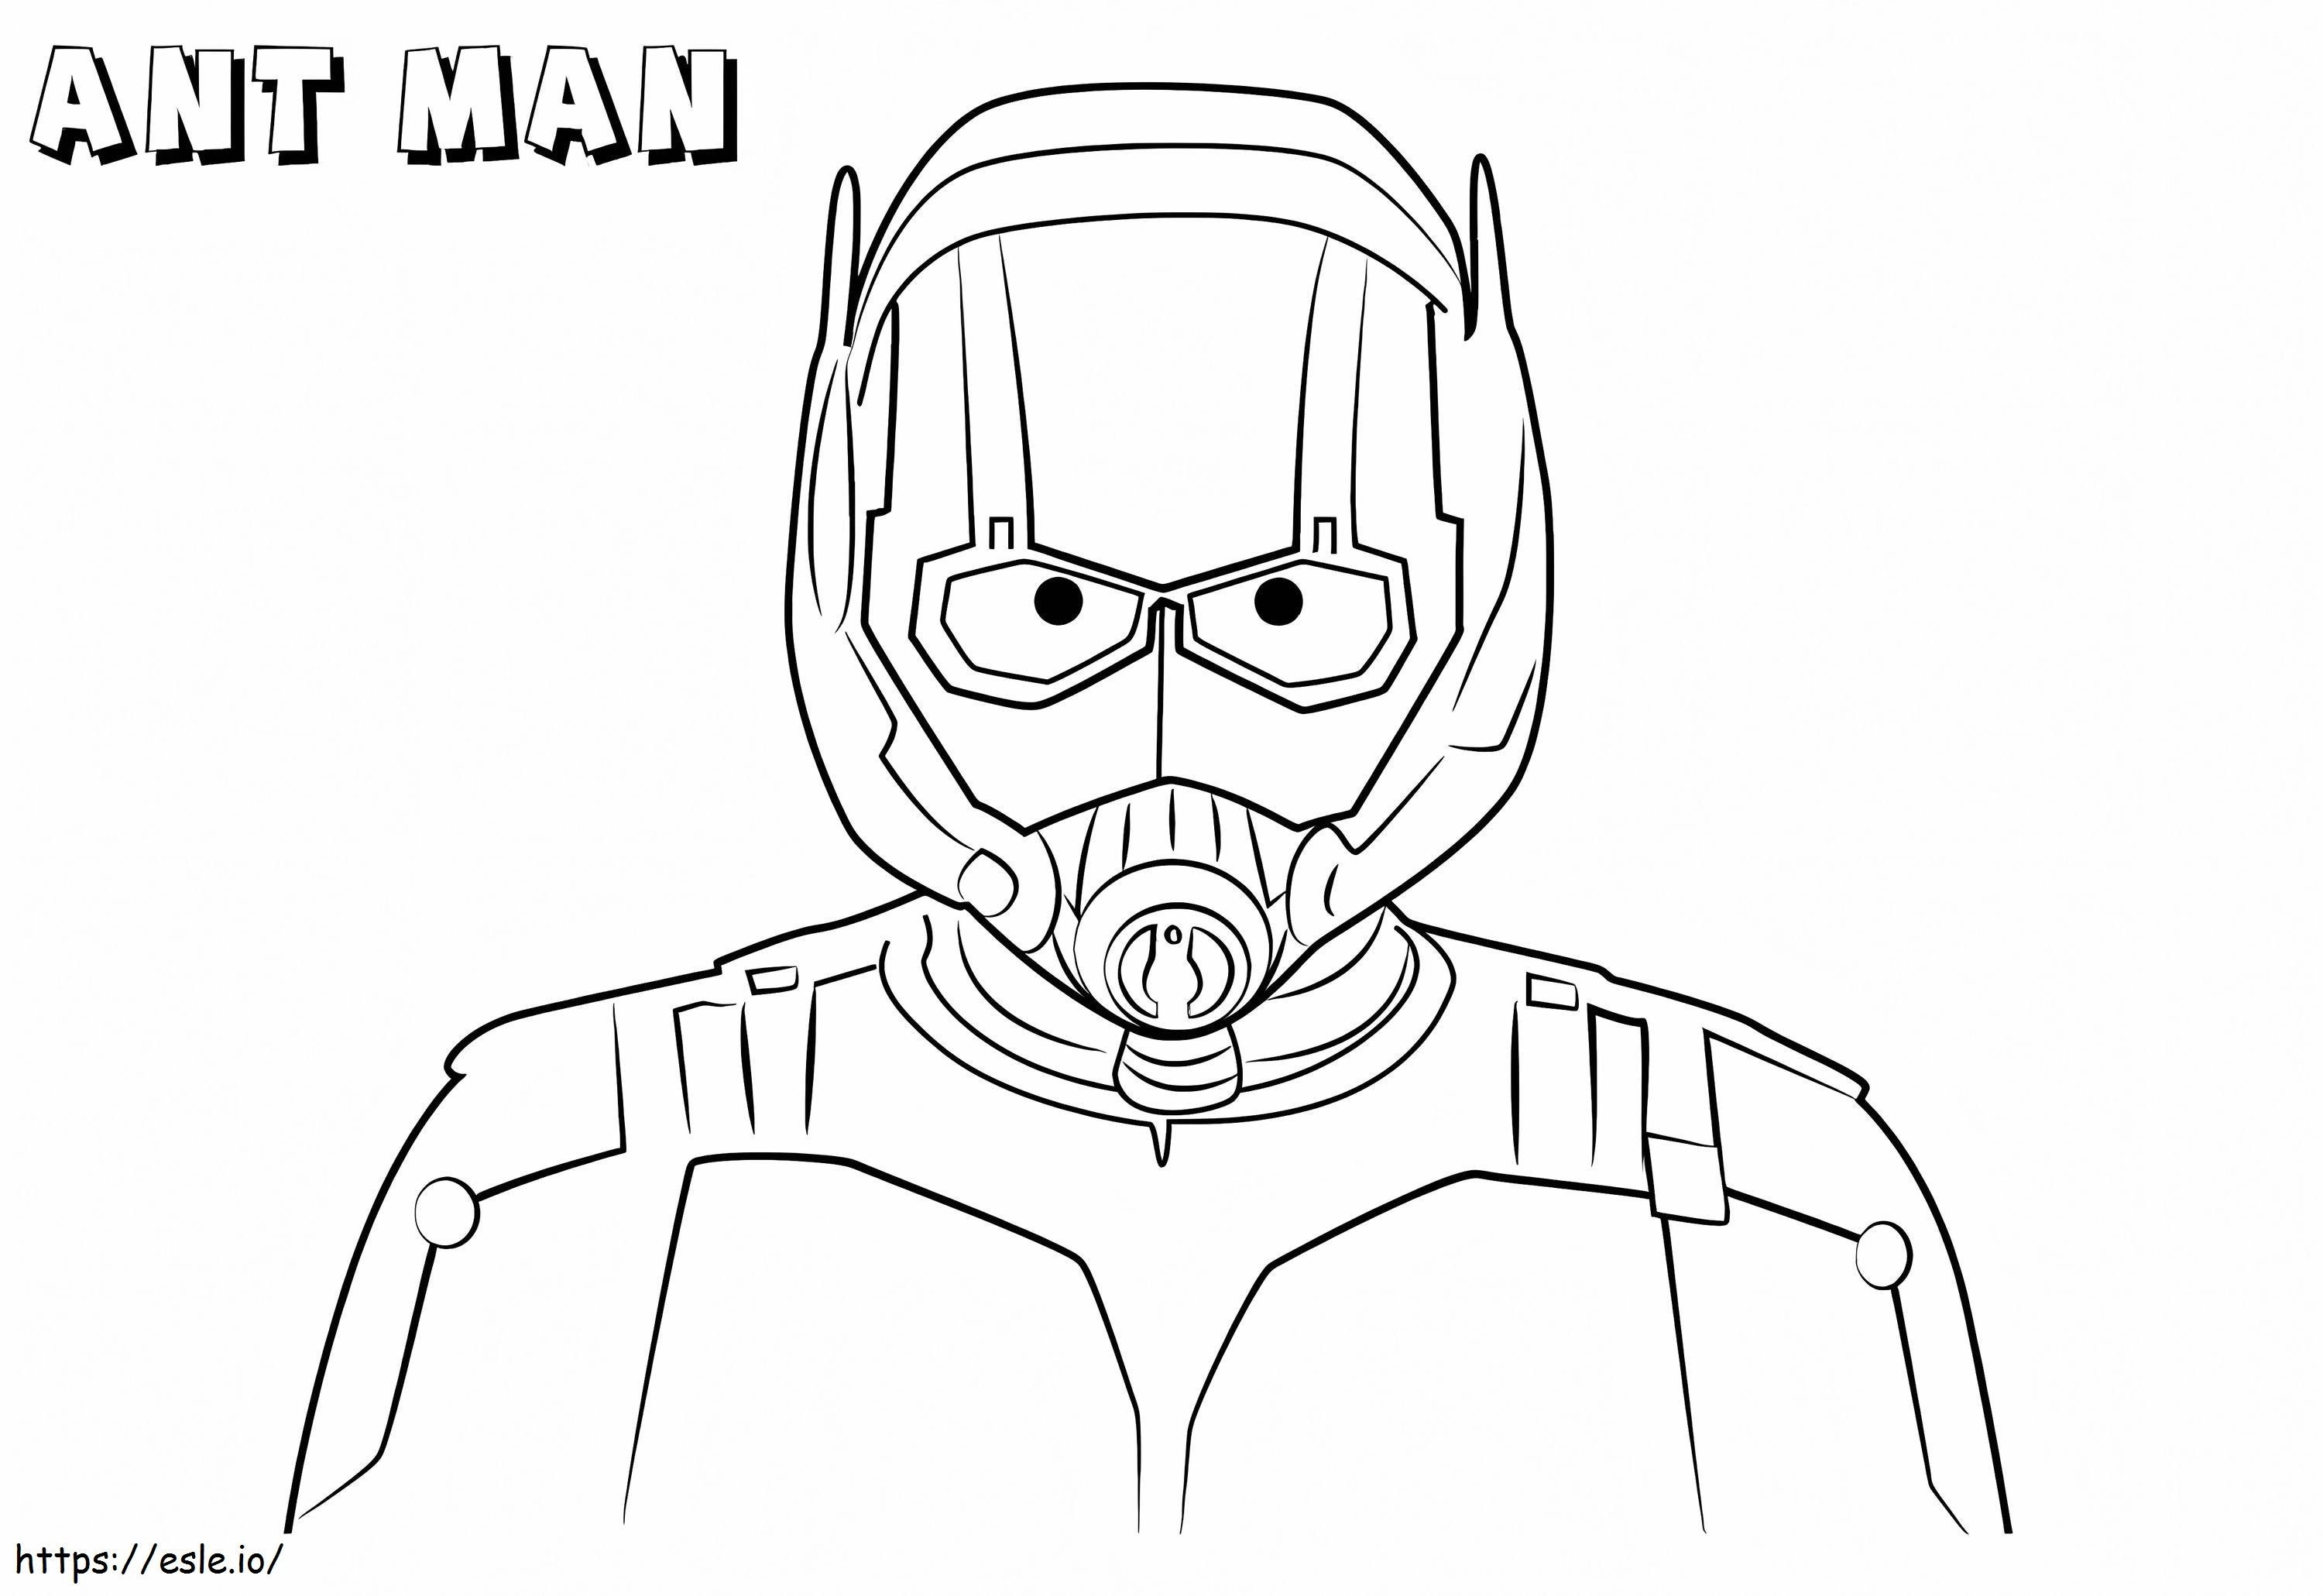 Ant Man 5 coloring page